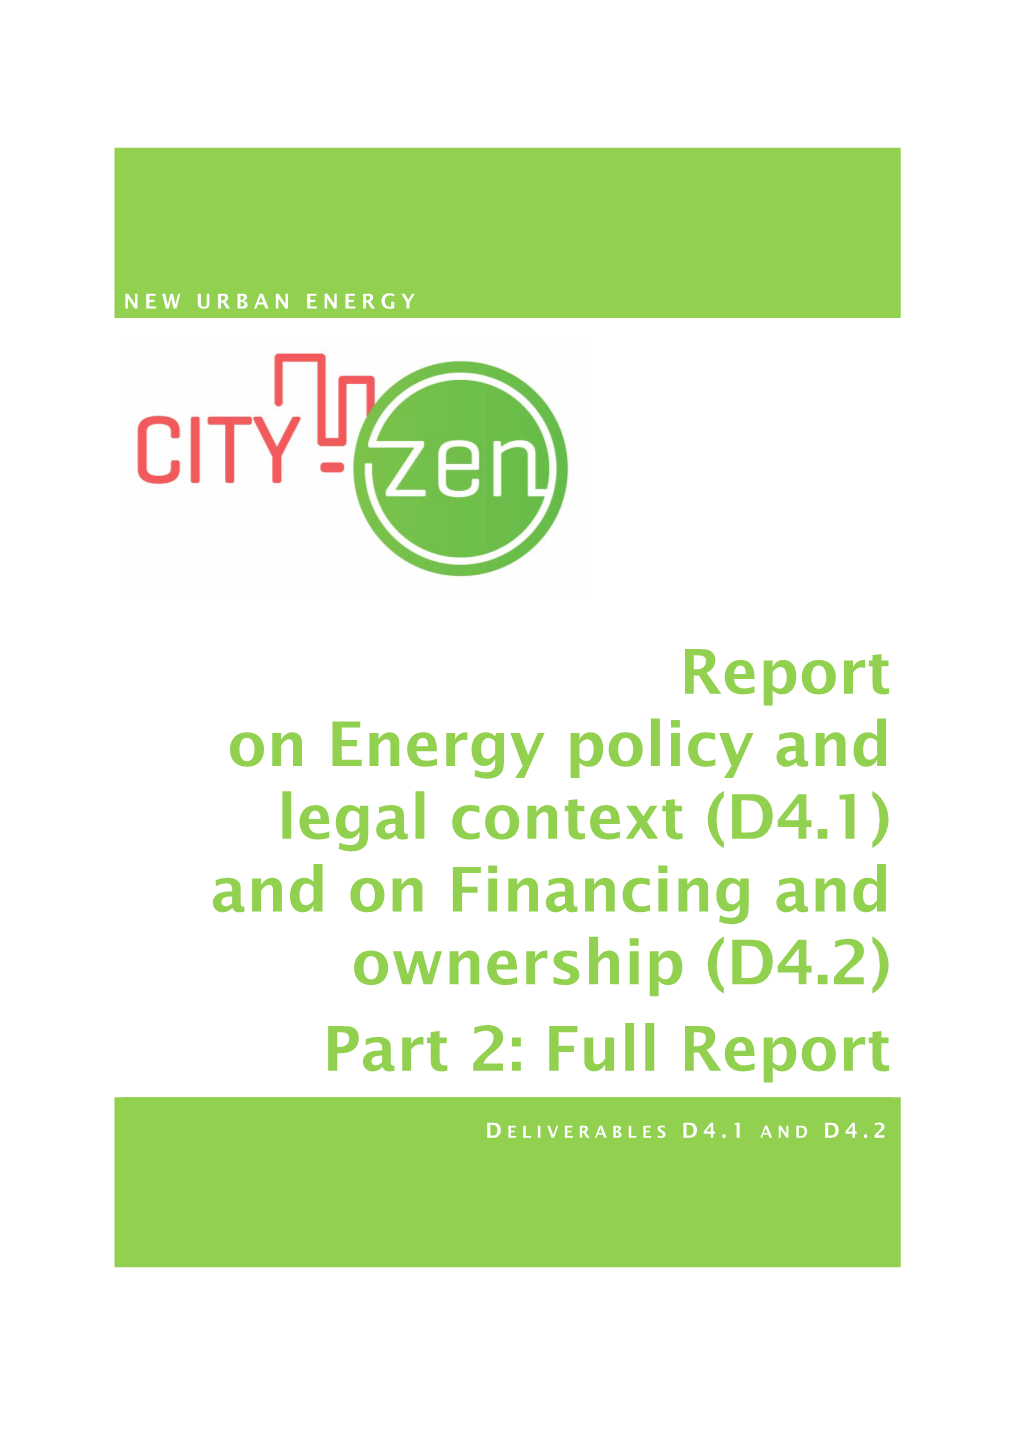 City-Zen Report on Energy Policy and Legal Context and on Financing And